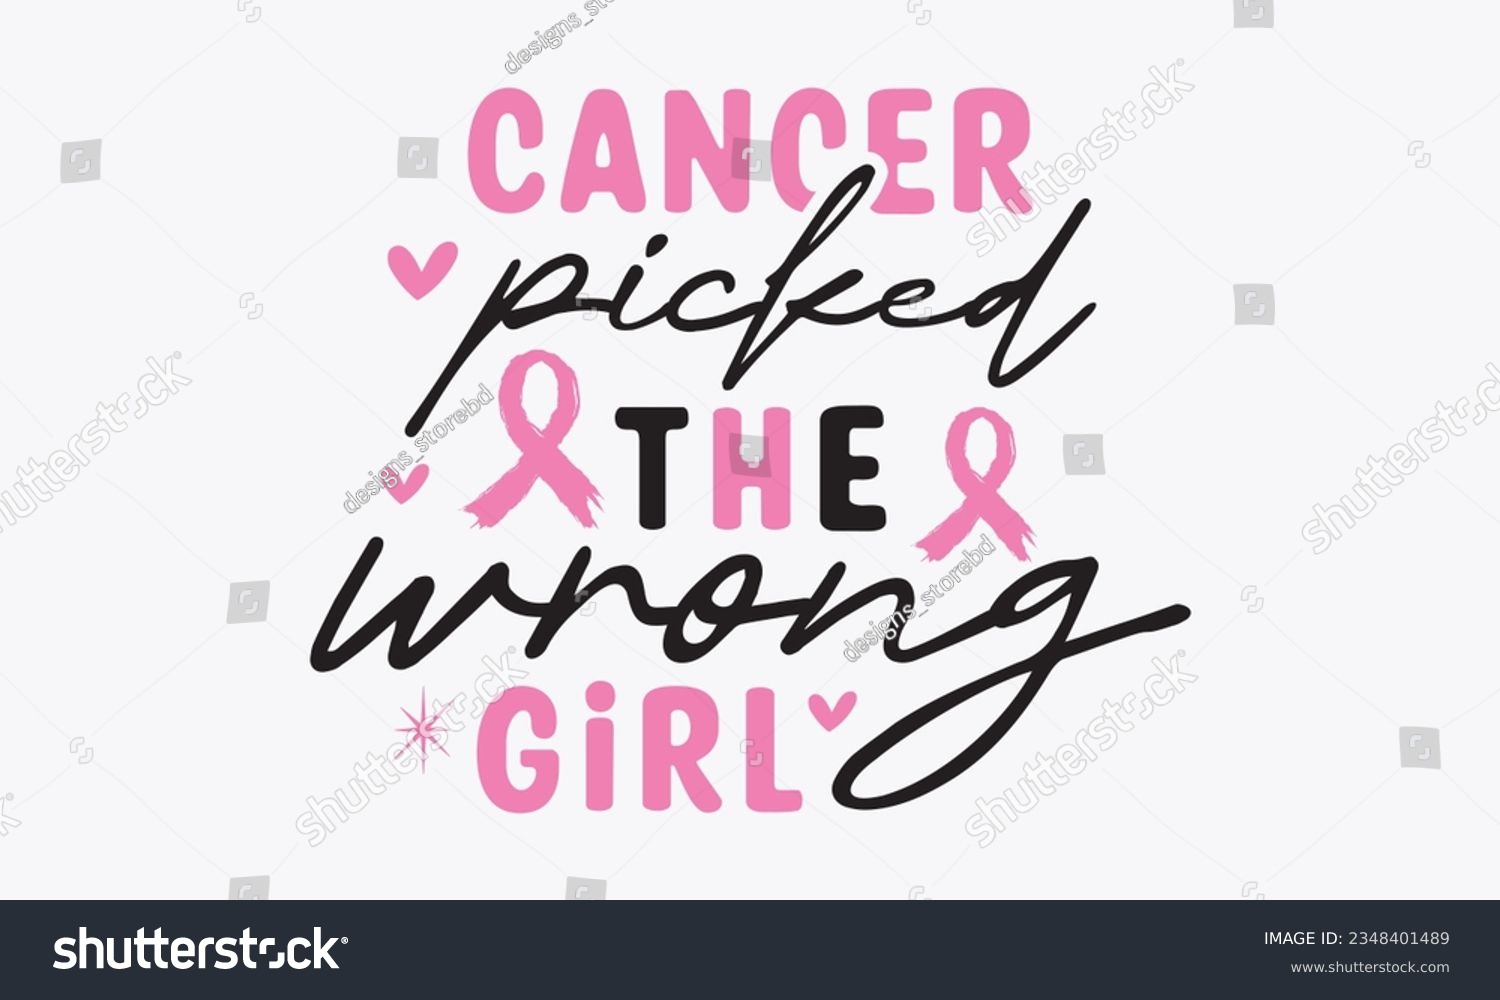 SVG of Cancer picked the wrong girl svg, Breast Cancer SVG design, Cancer Awareness, Instant Download, Breast Ribbon svg, cut files, Cricut, Silhouette, Breast Cancer t shirt design Quote bundle svg